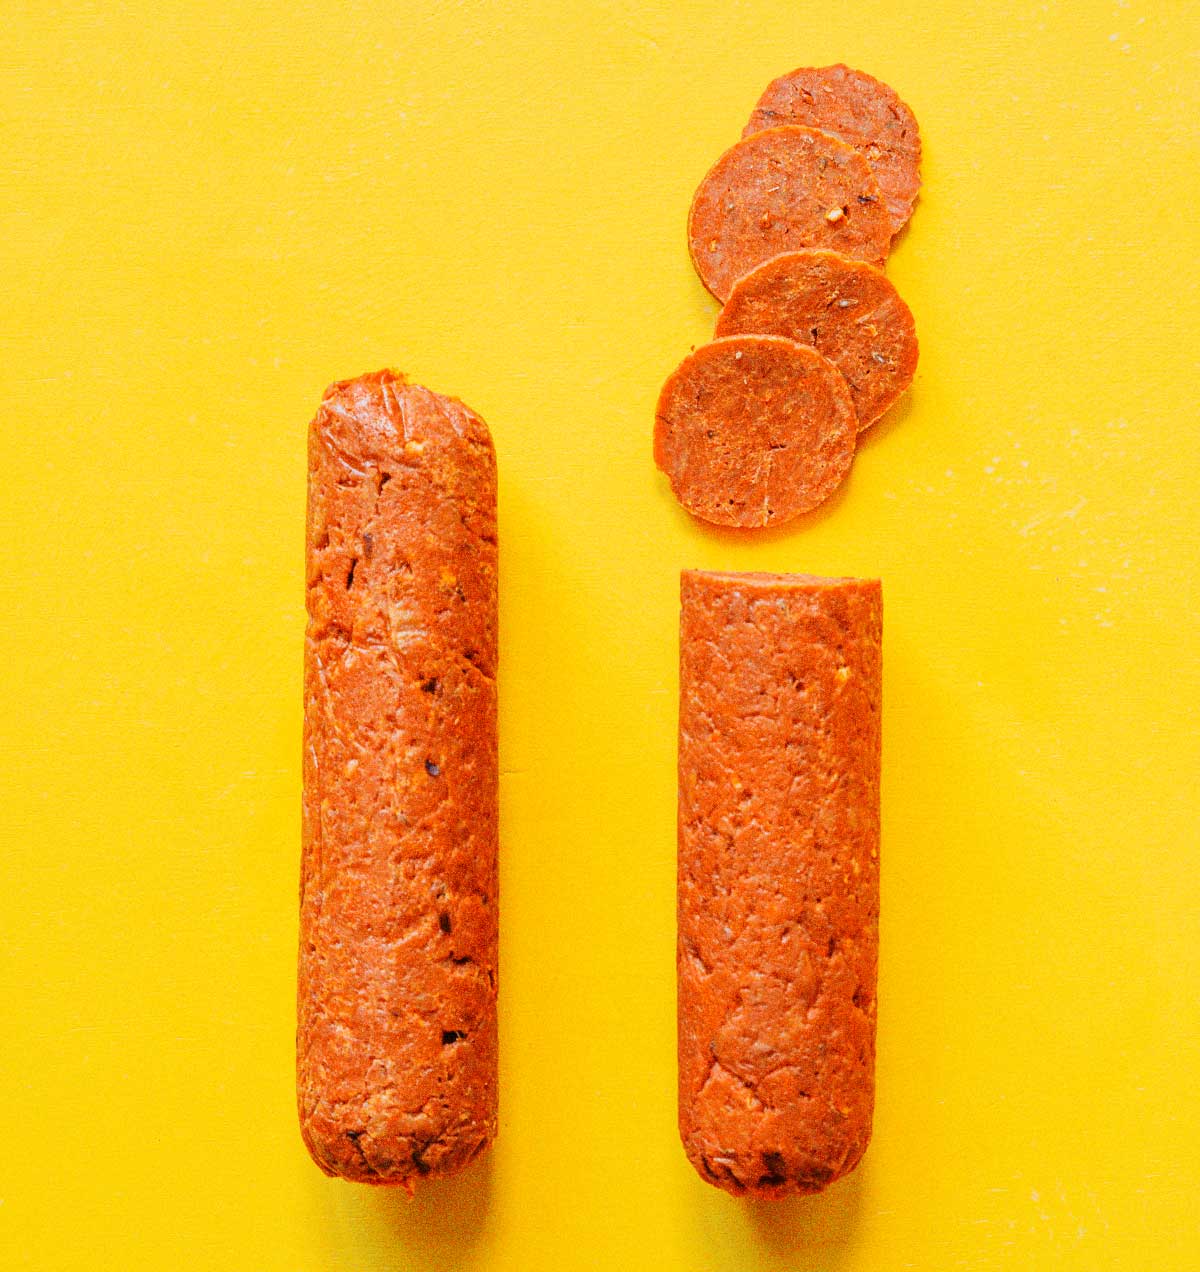 Two logs of vegan pepperoni side by side on a yellow background